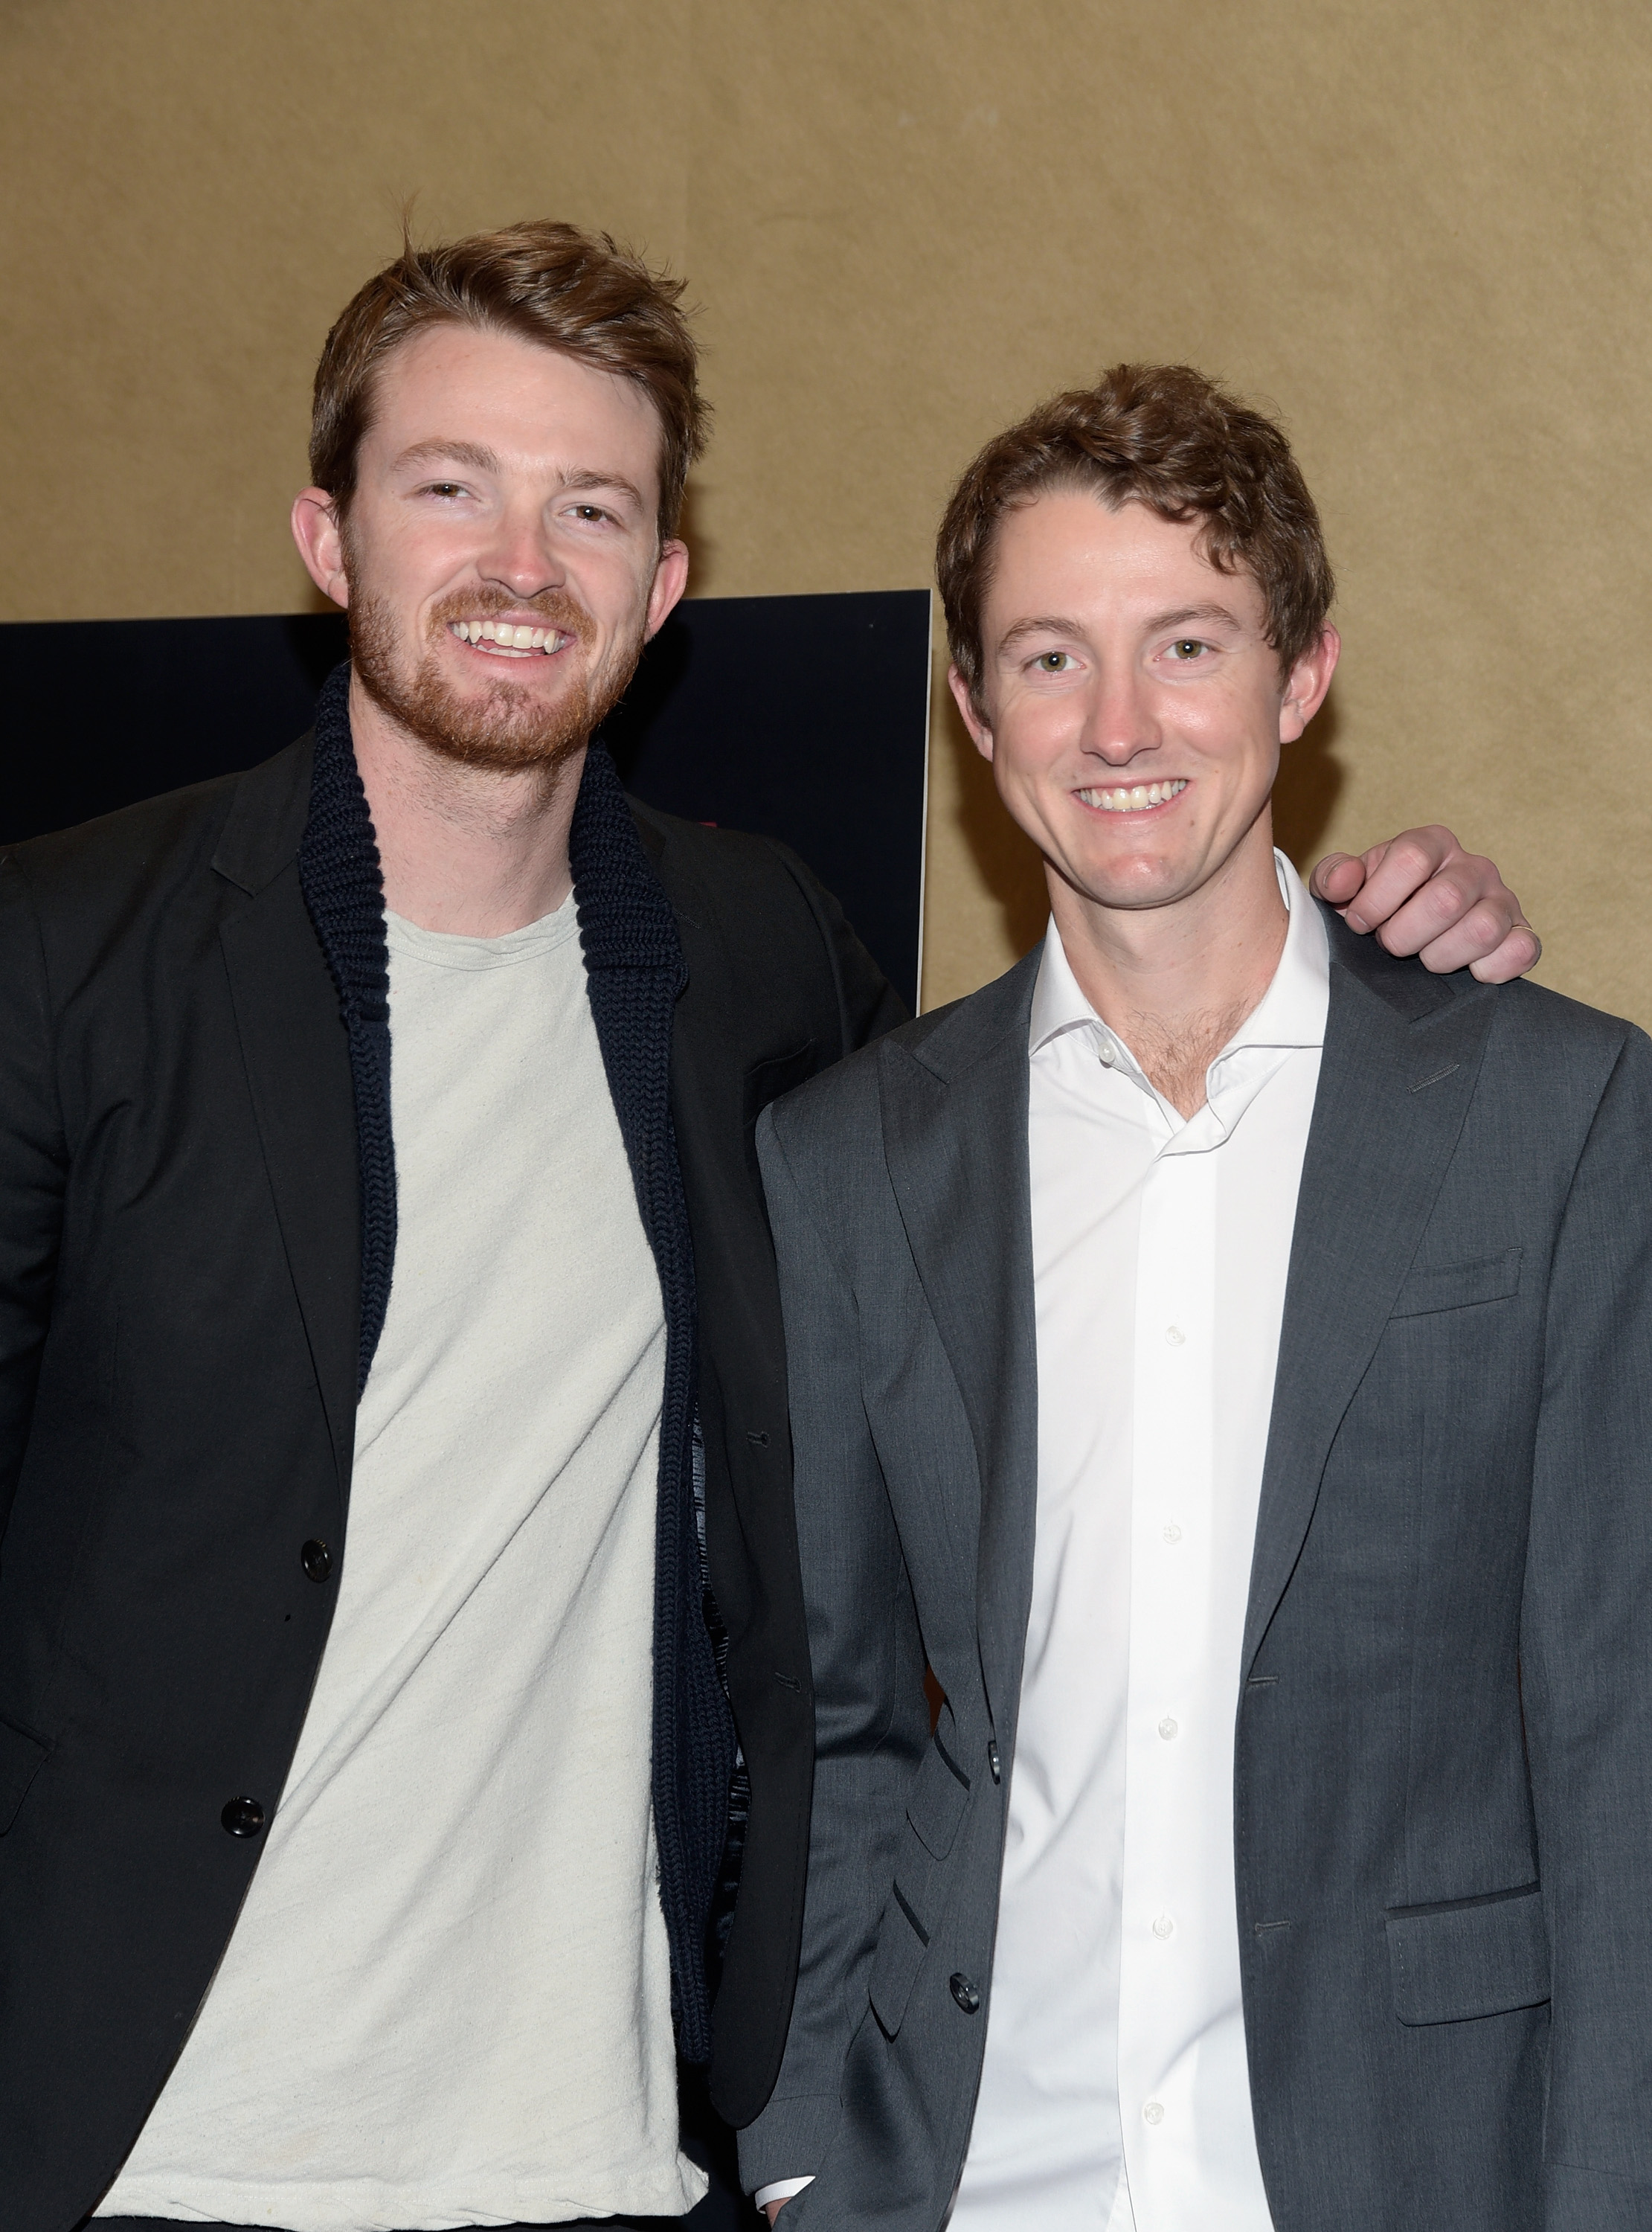 Trevor and Ty Gretzky at the Los Angeles premiere of "In Search of Greatness" on November 1, 2018, in Century City, California | Source: Getty Images